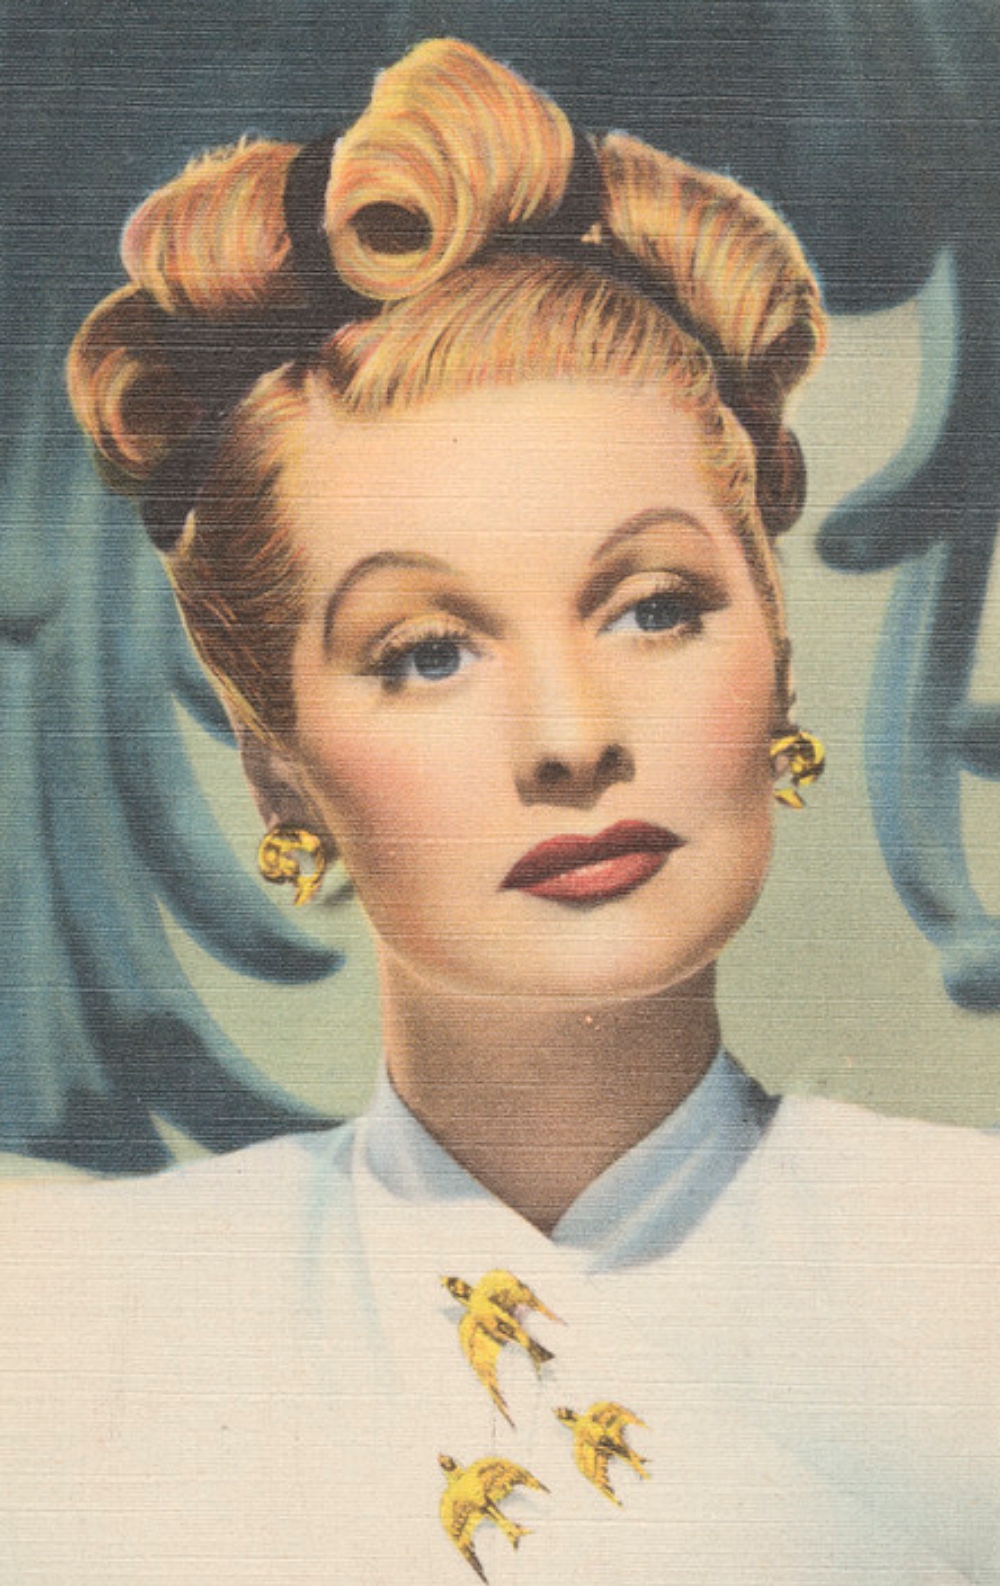 MGM postcard of Lucille Ball early 1940s